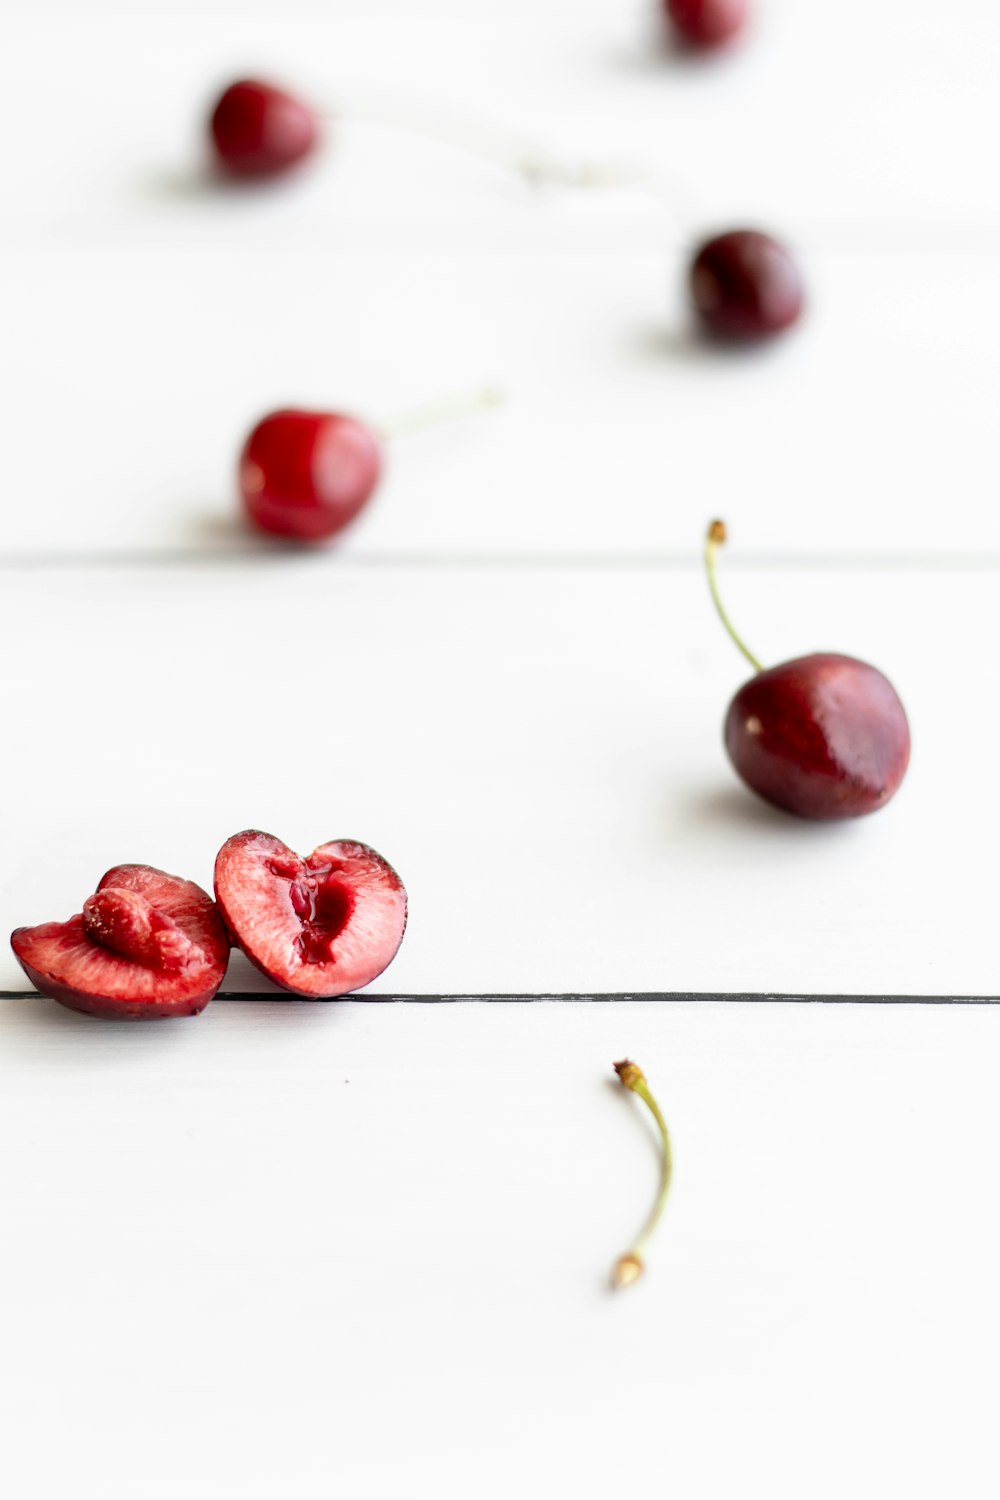 red round fruits on white surface